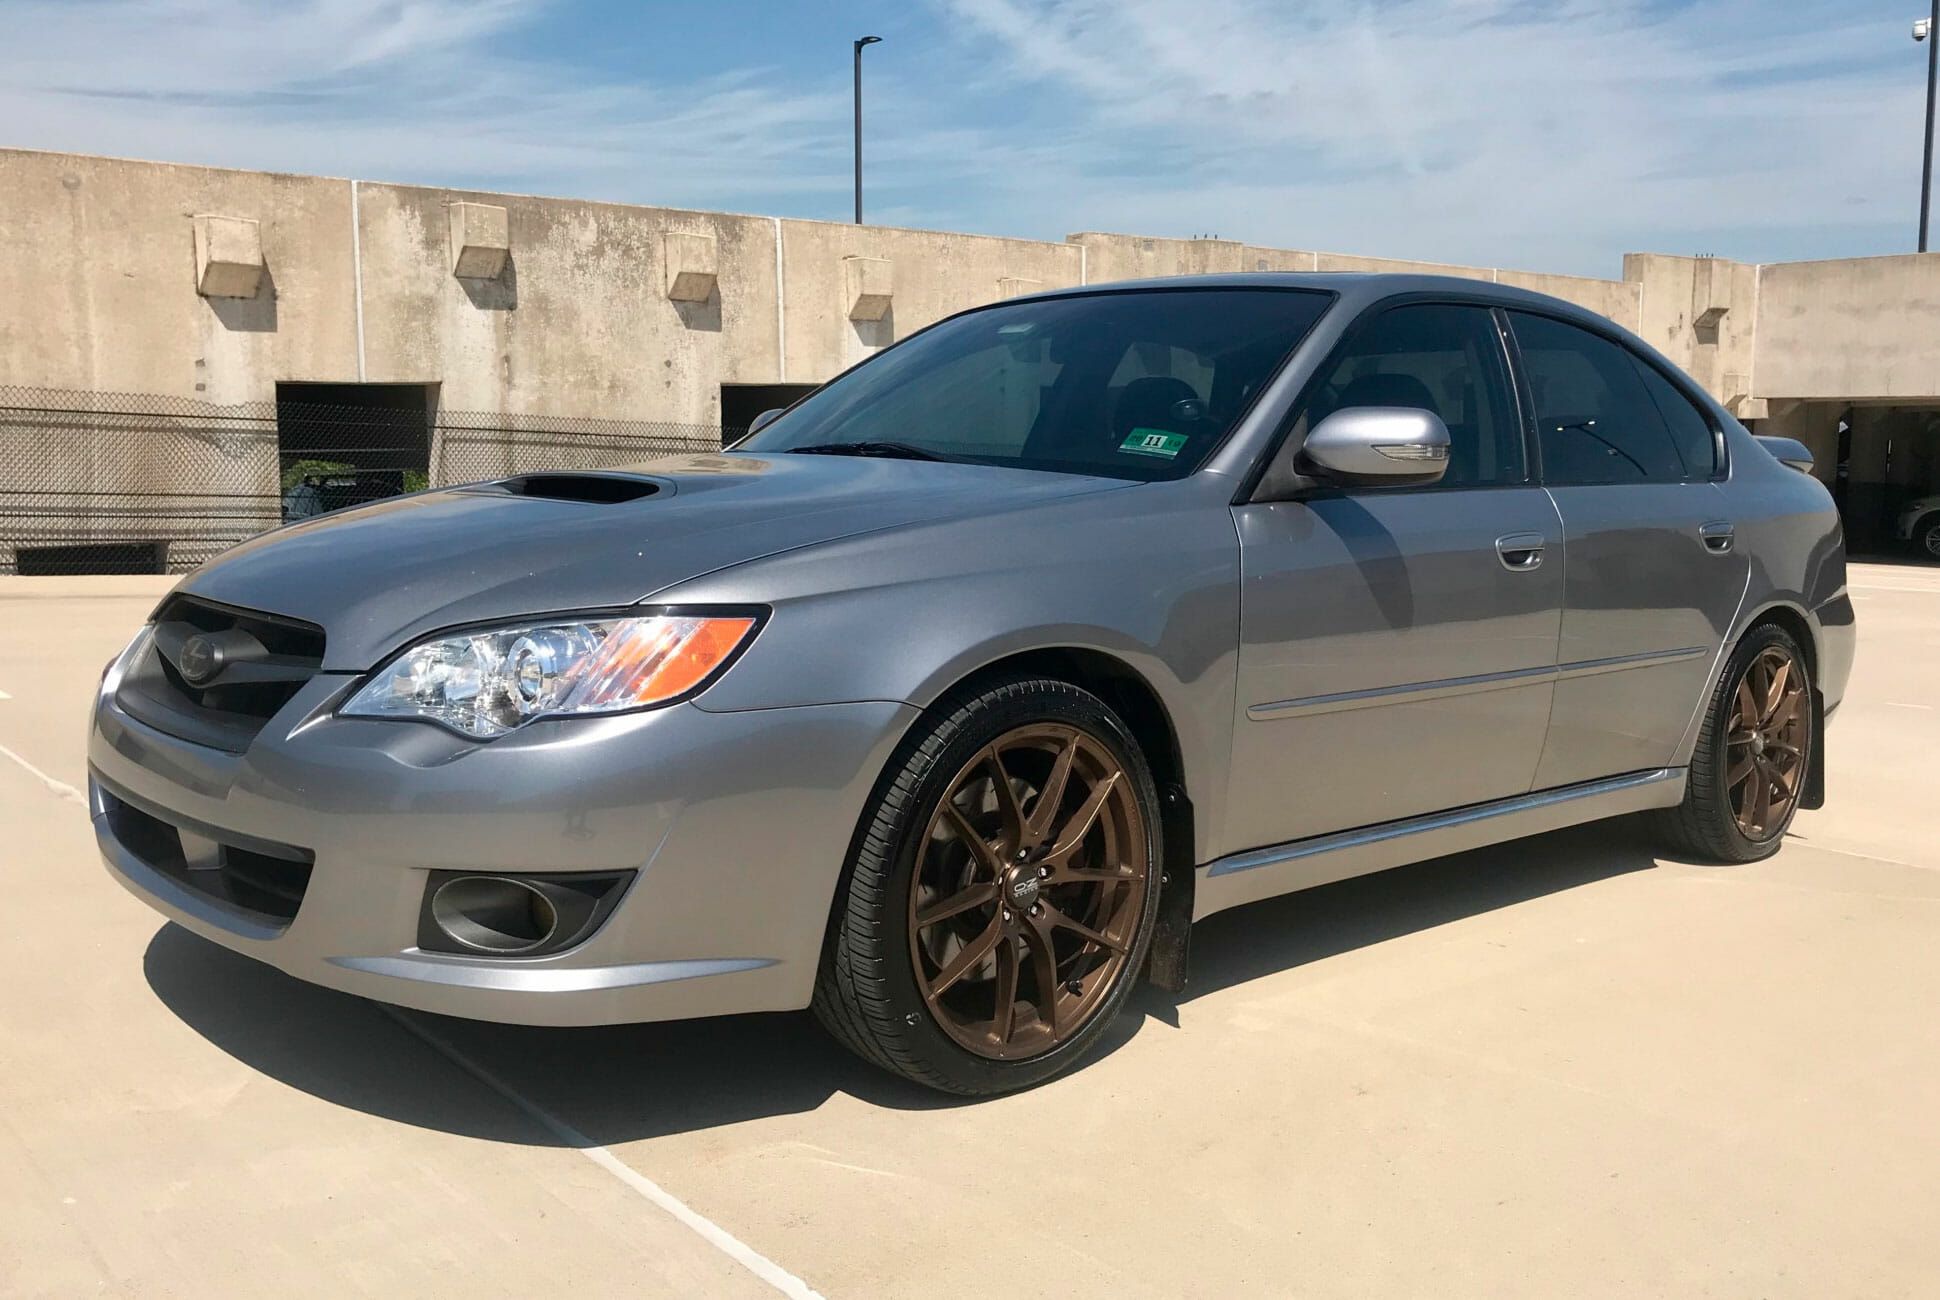 This Is the Closest Thing to a Subaru Legacy STI You Can Buy